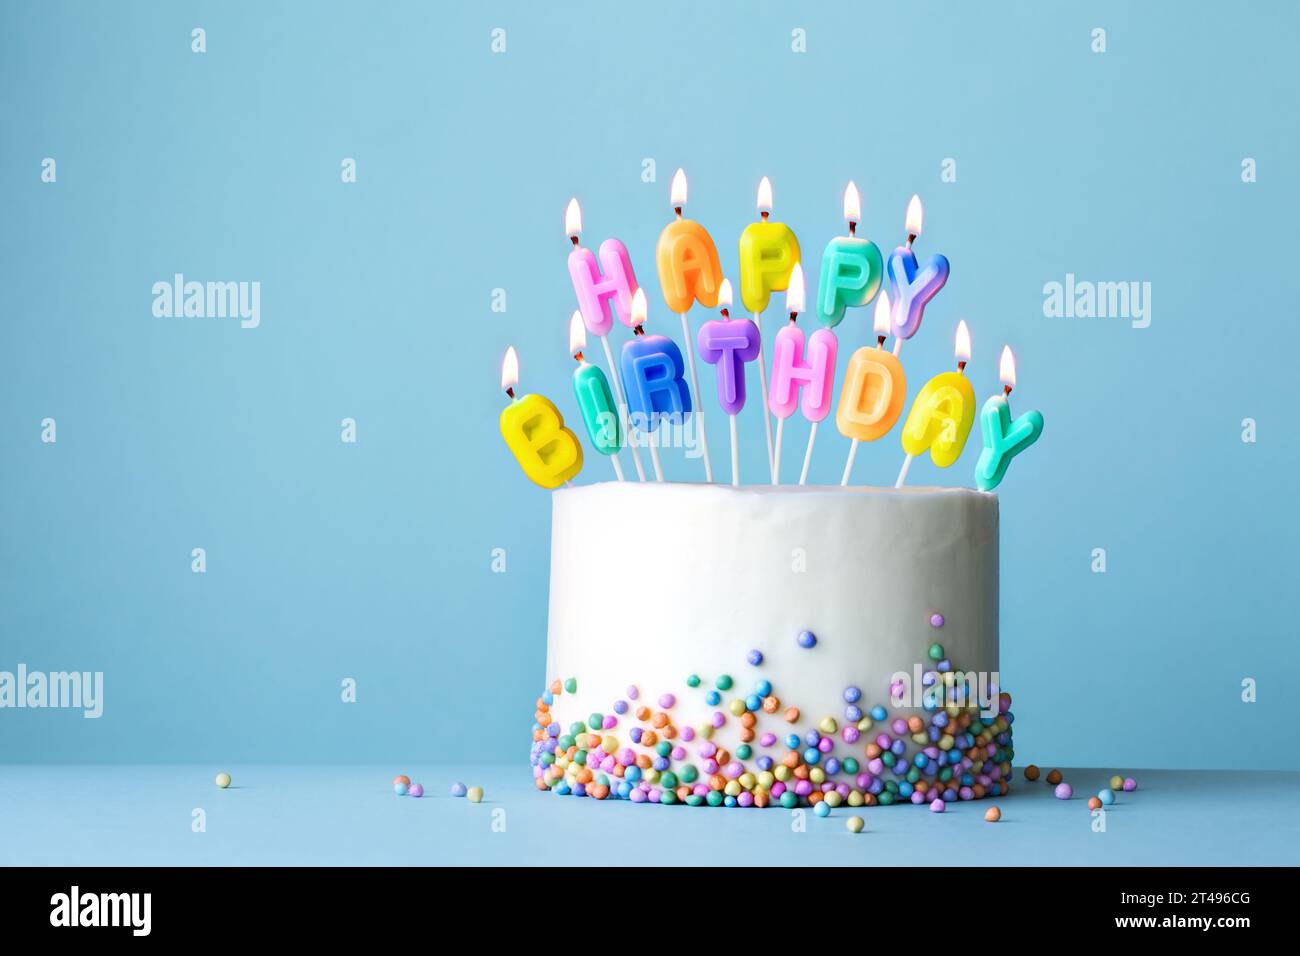 Colorful birthday cake with birthday candles spelling happy birthday against a blue background Stock Photo